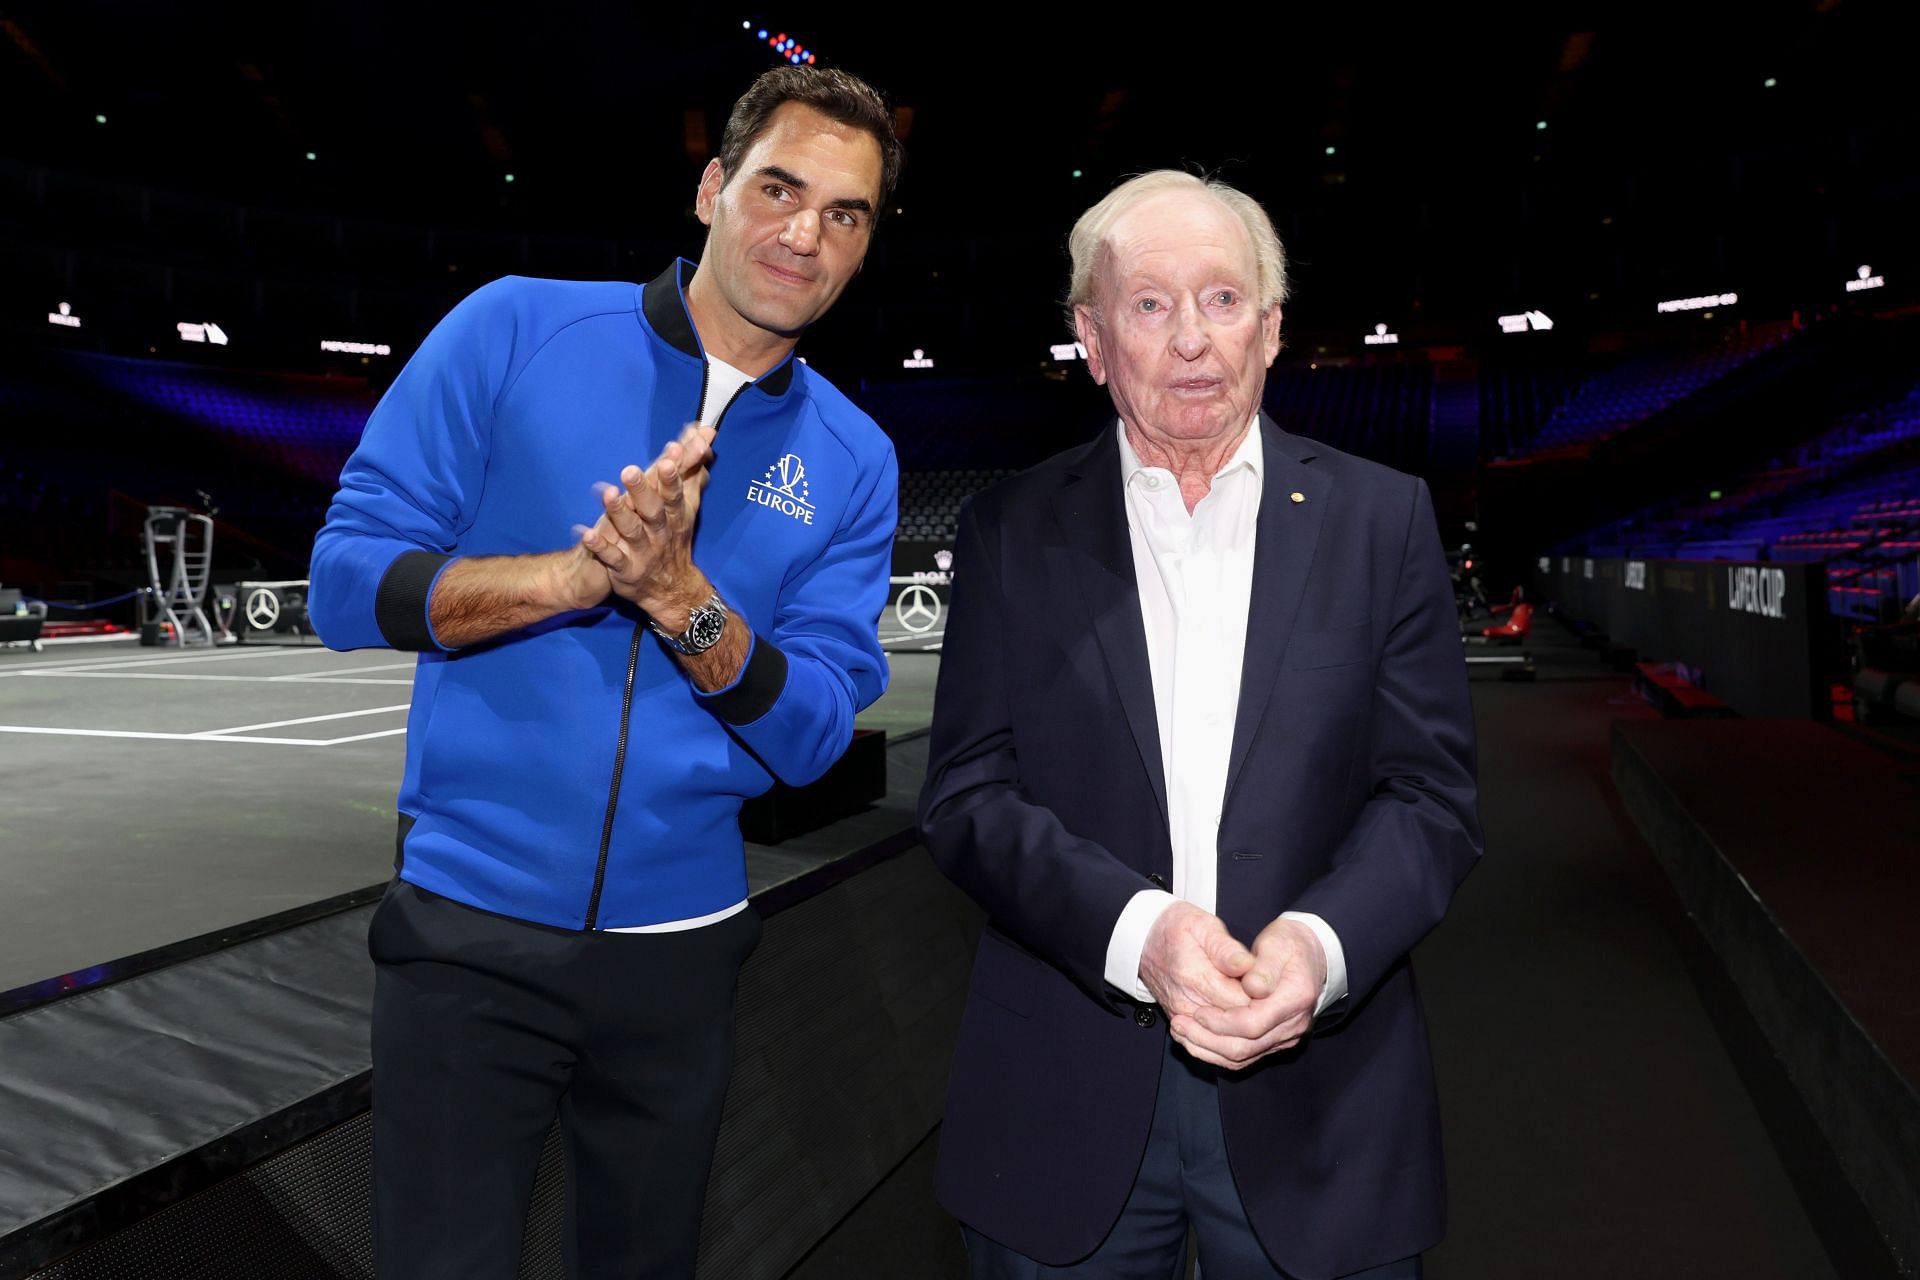 Roger Federer with Rod Laver at the 2022 Laver Cup. (Pic - Getty Images)